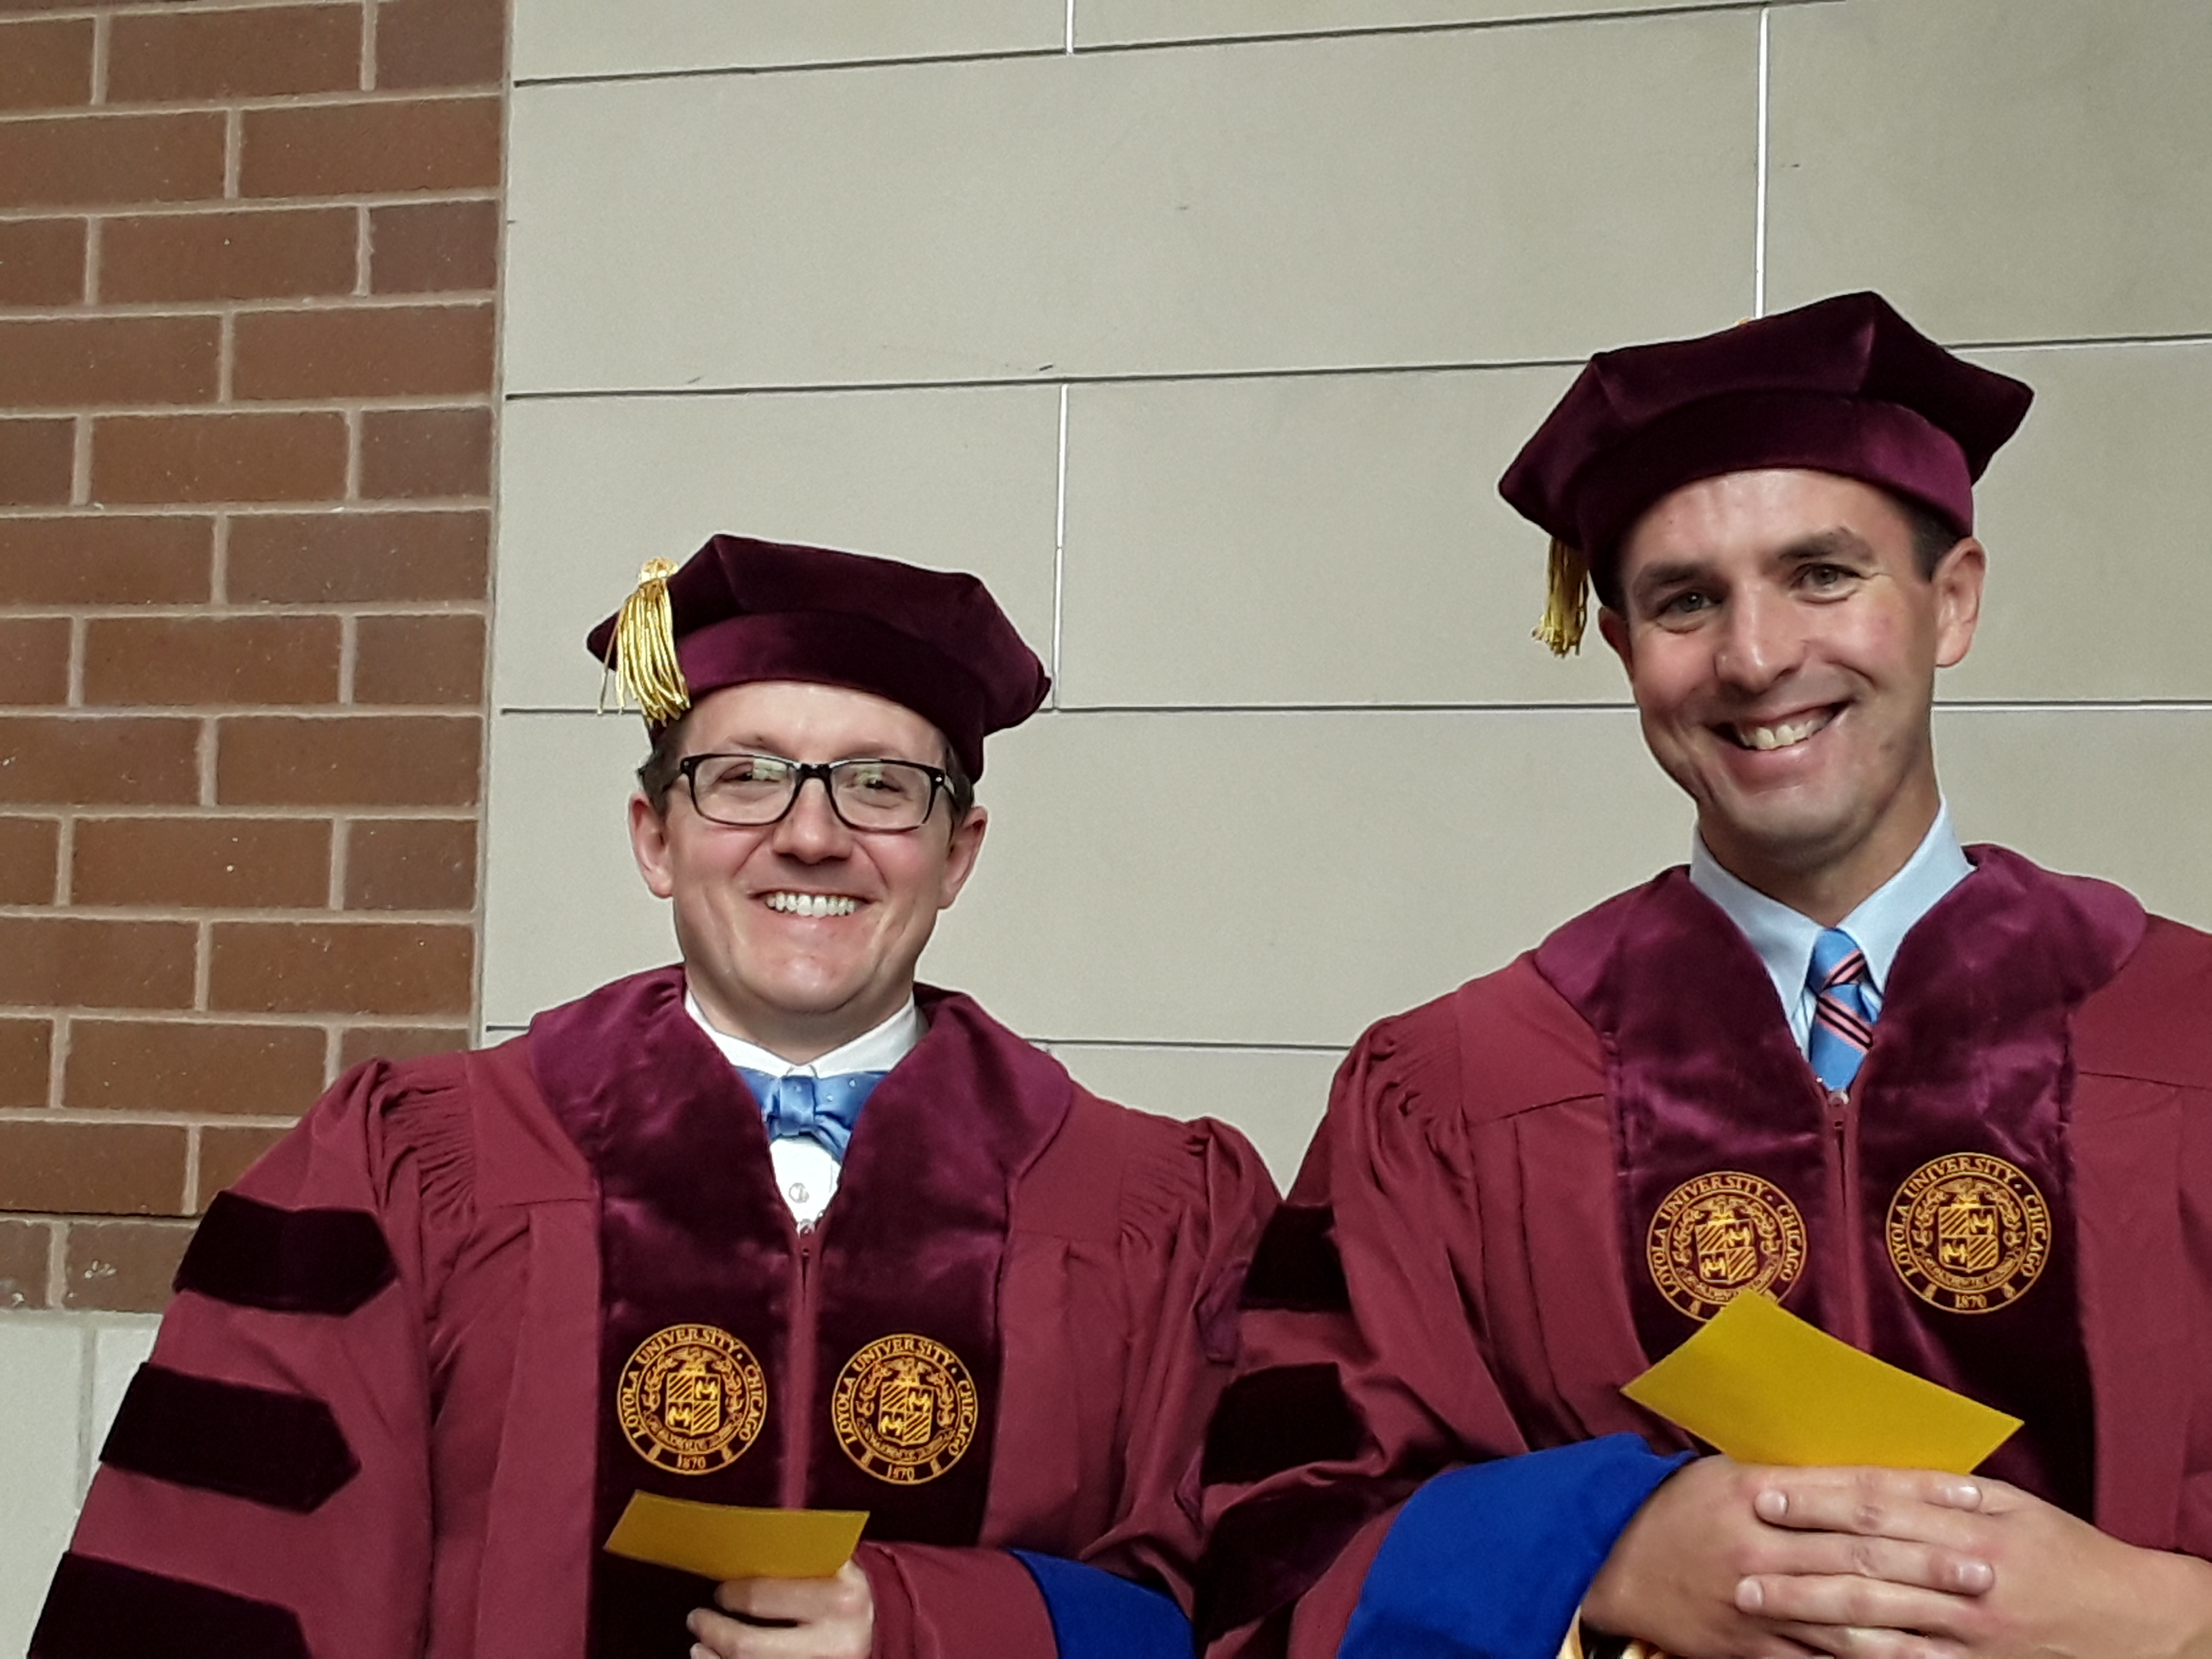 Dr. Steven Sacco and Dr. Kyle Woolley